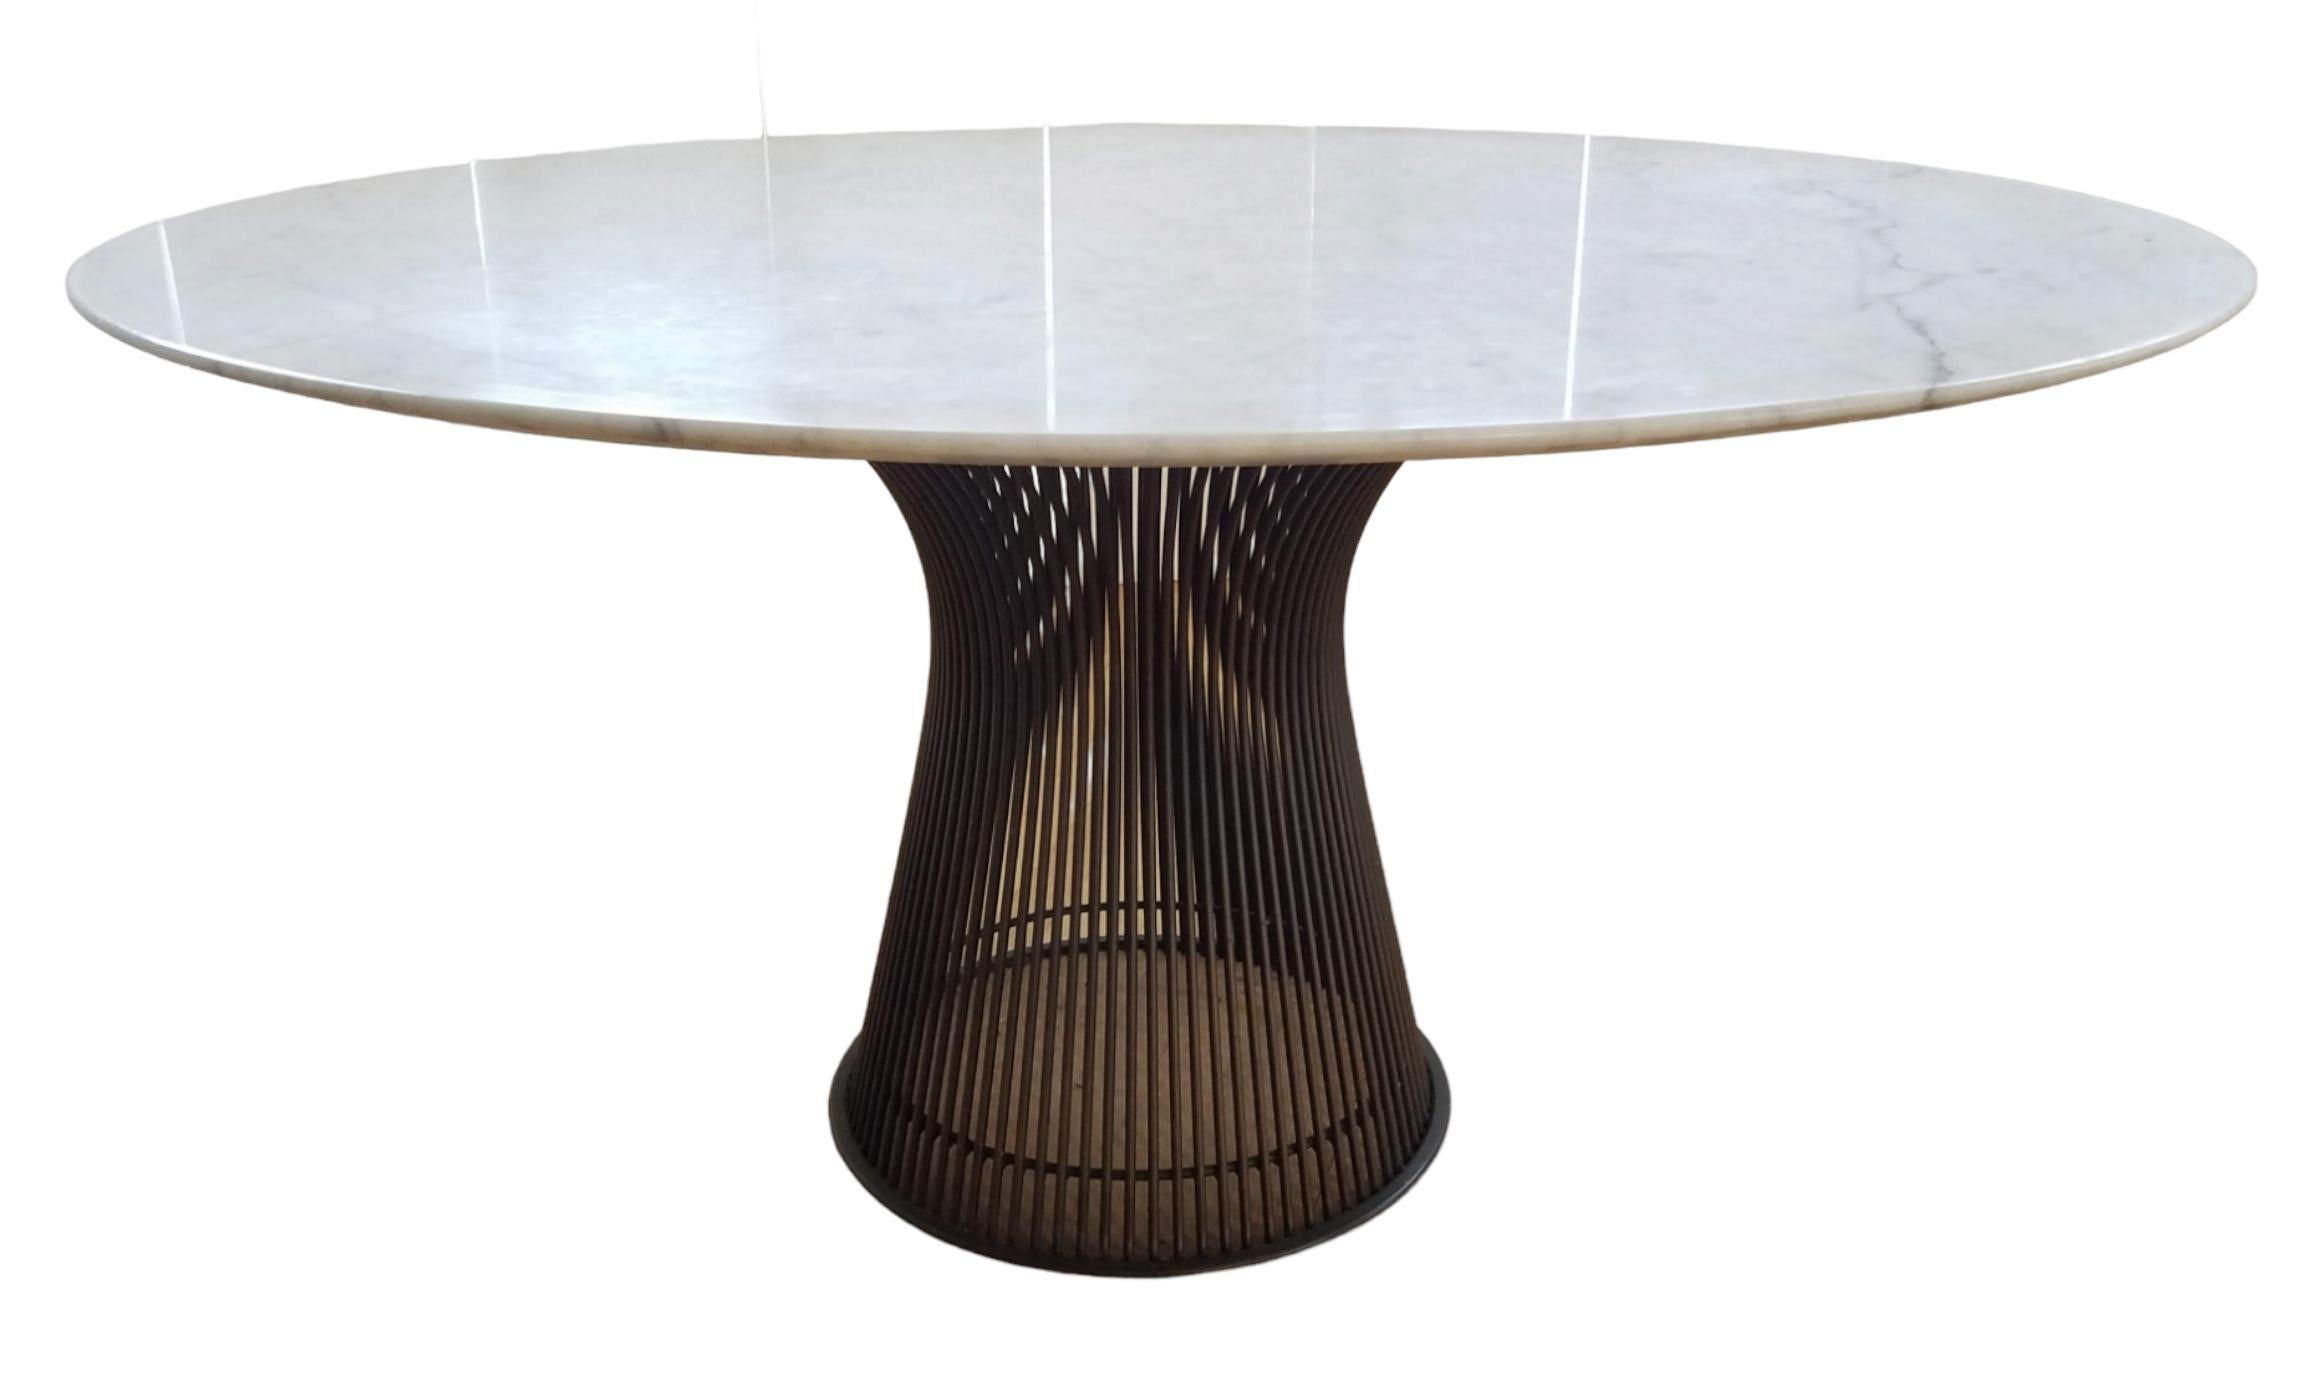 Mid-20th Century Warren Platner Bronze Base Arabescato Marble Top Dining Table for Knoll, 1960s